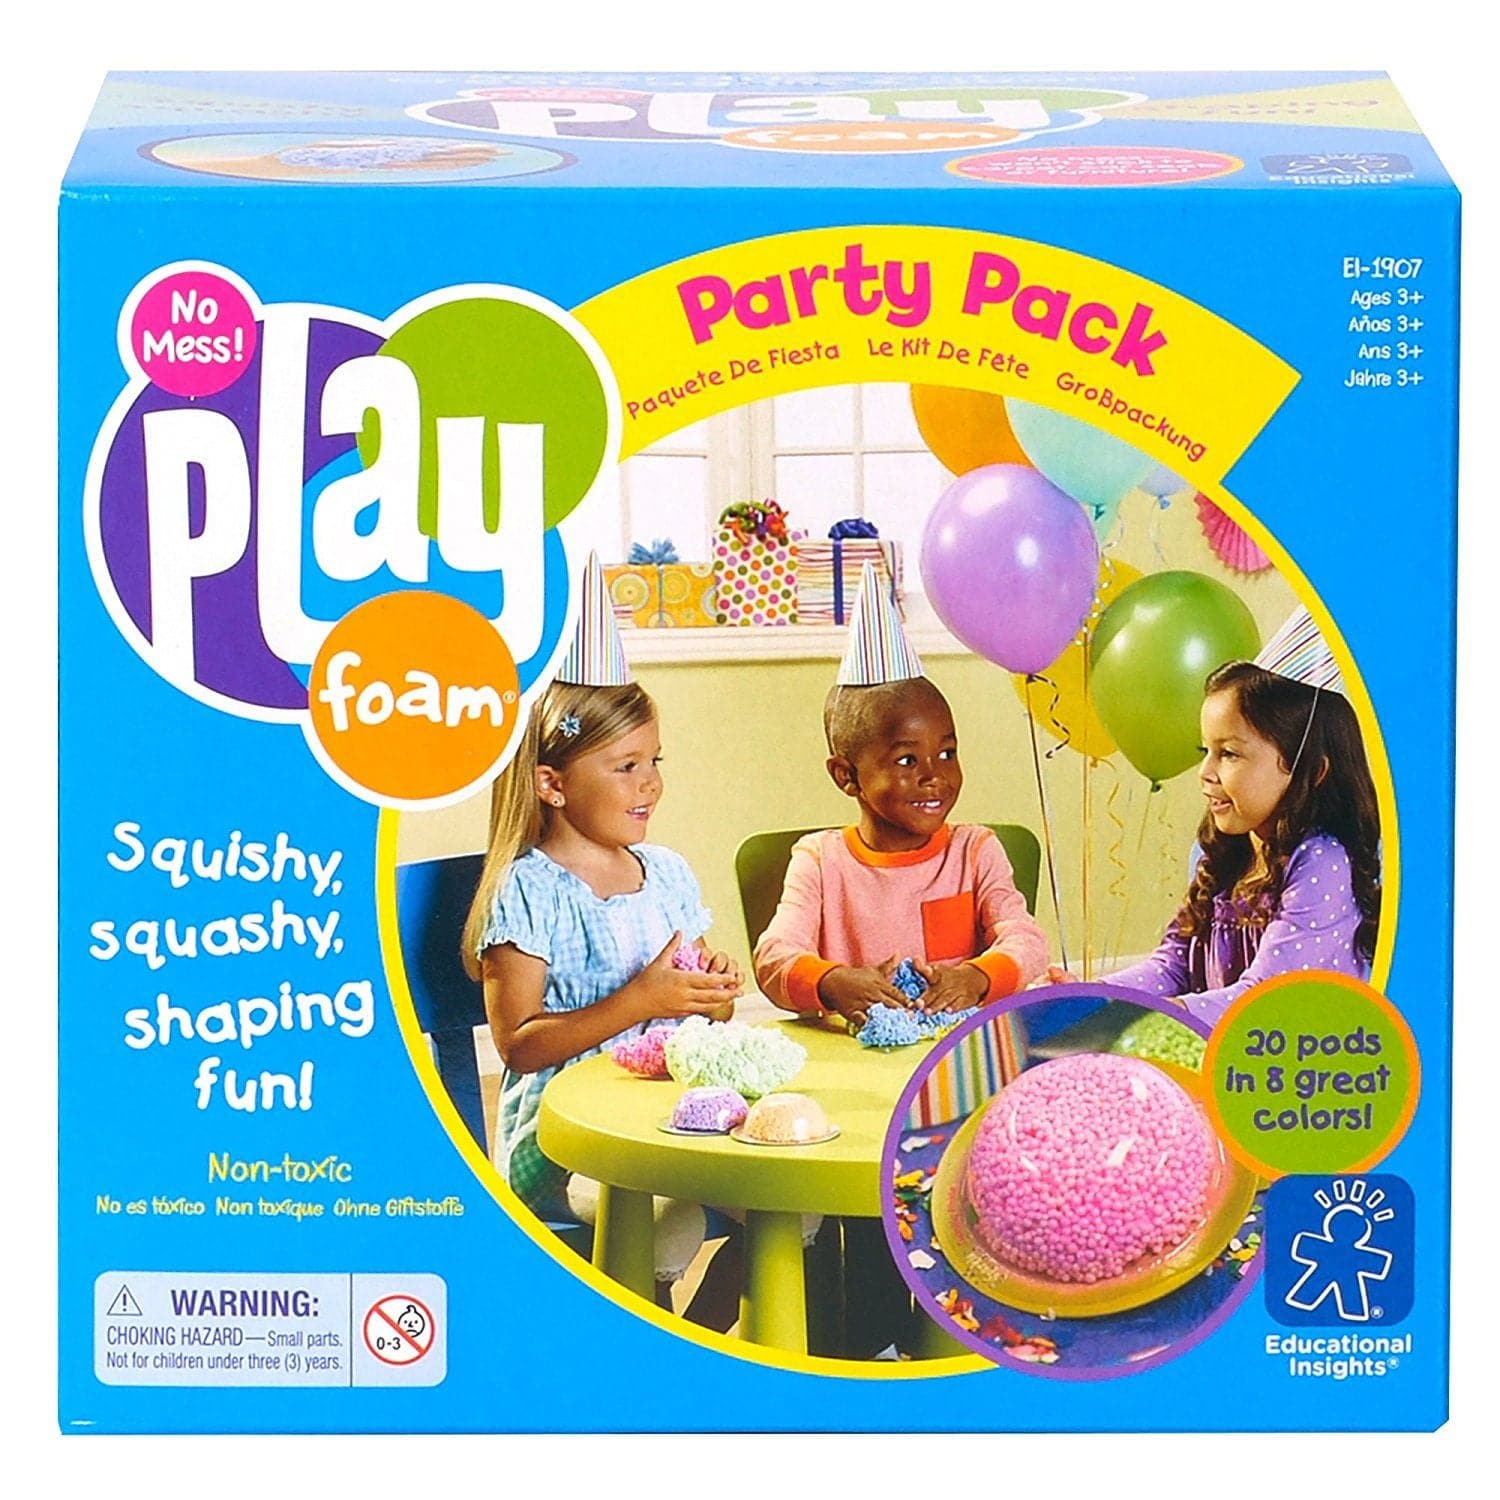 Playfoam Combo 20 Pack, Playfoam may have a new look, but rest assured the product inside still offers the same mess-free creative play fun,this pack of Playfoam Combo 20 Pack offers superb value for money. Children simply shape the Playfoam Combo 20 Pack into anything in their imagination before squashing it down and starting all over again. The Playfoam Combo 20 Pack is completely mess free, it does not stick to hands, clothes or carpet. It never dries out, use it straight from the box for creative play o